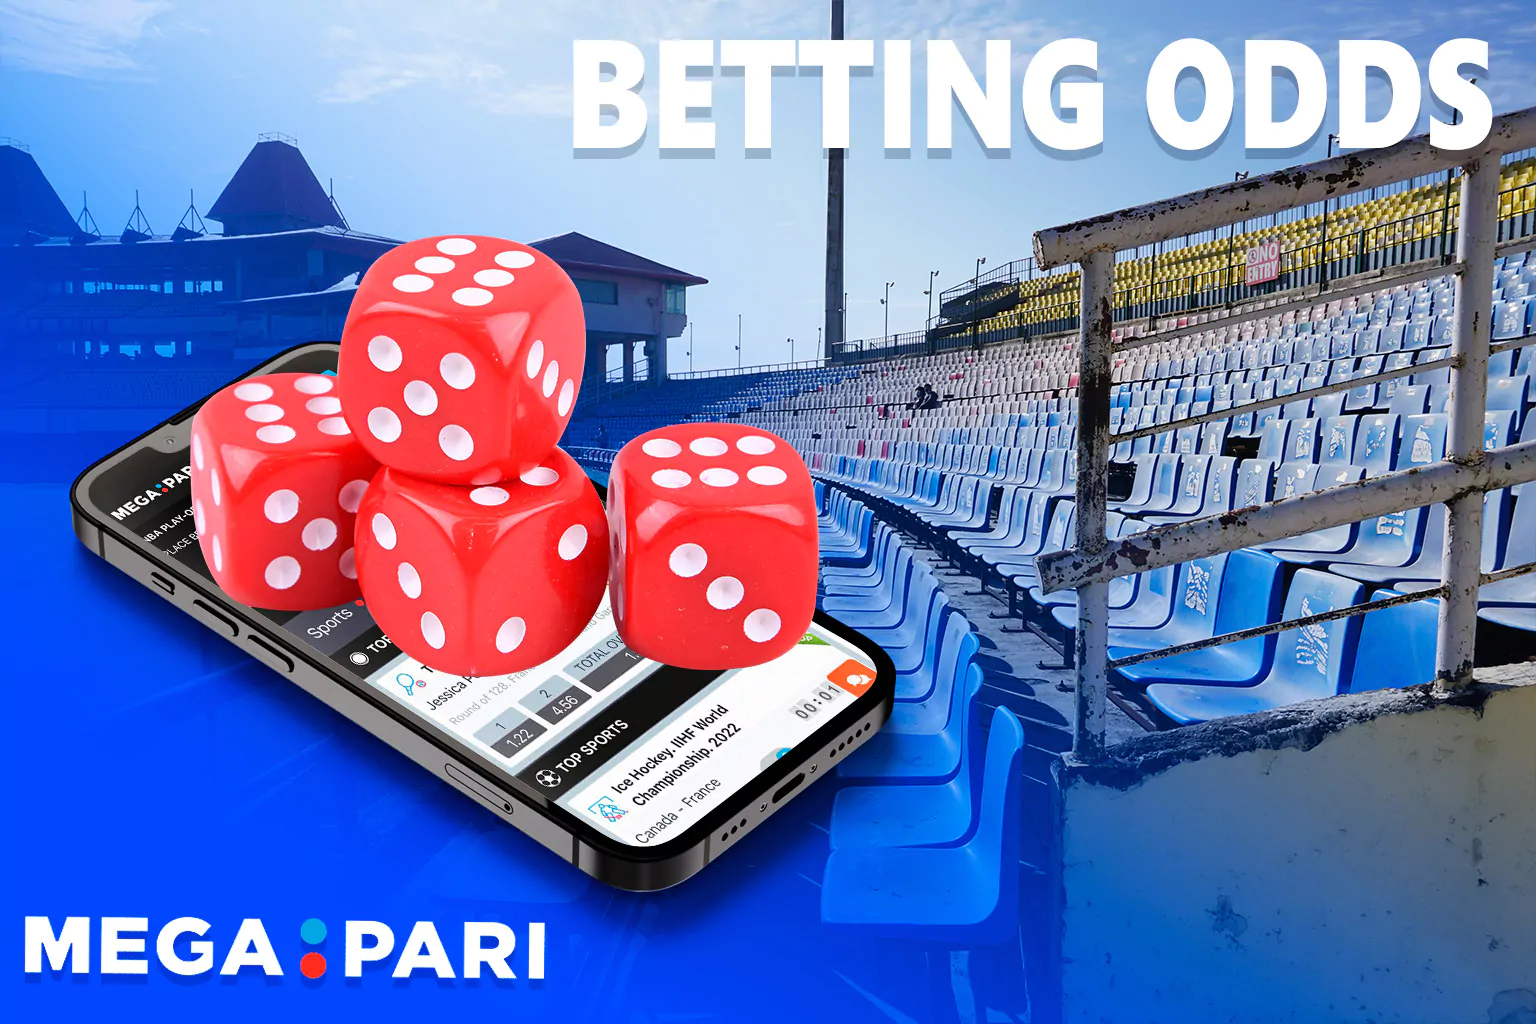 In Megapari, you can calculate the potential profit from a bet using the odds offered by the bookmaker.